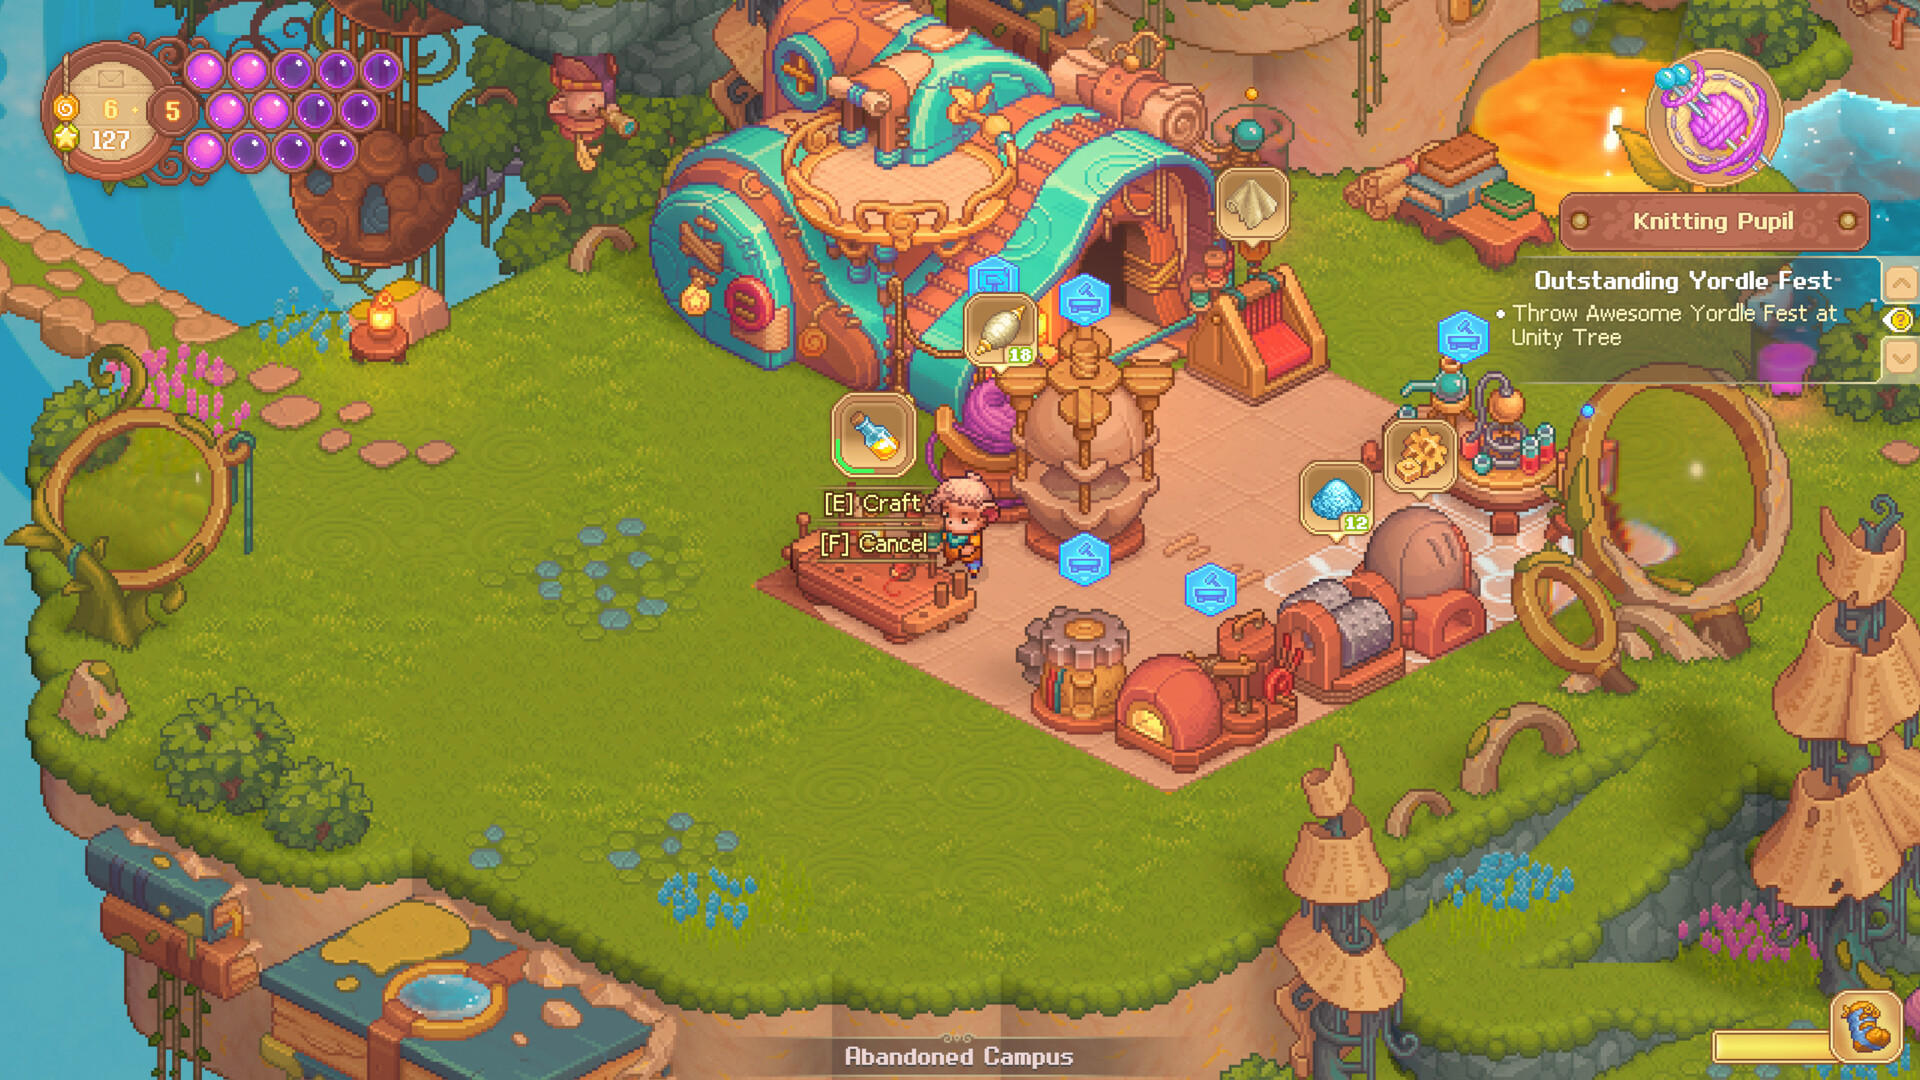 Bandle Tale: A League of Legends Story screenshot game